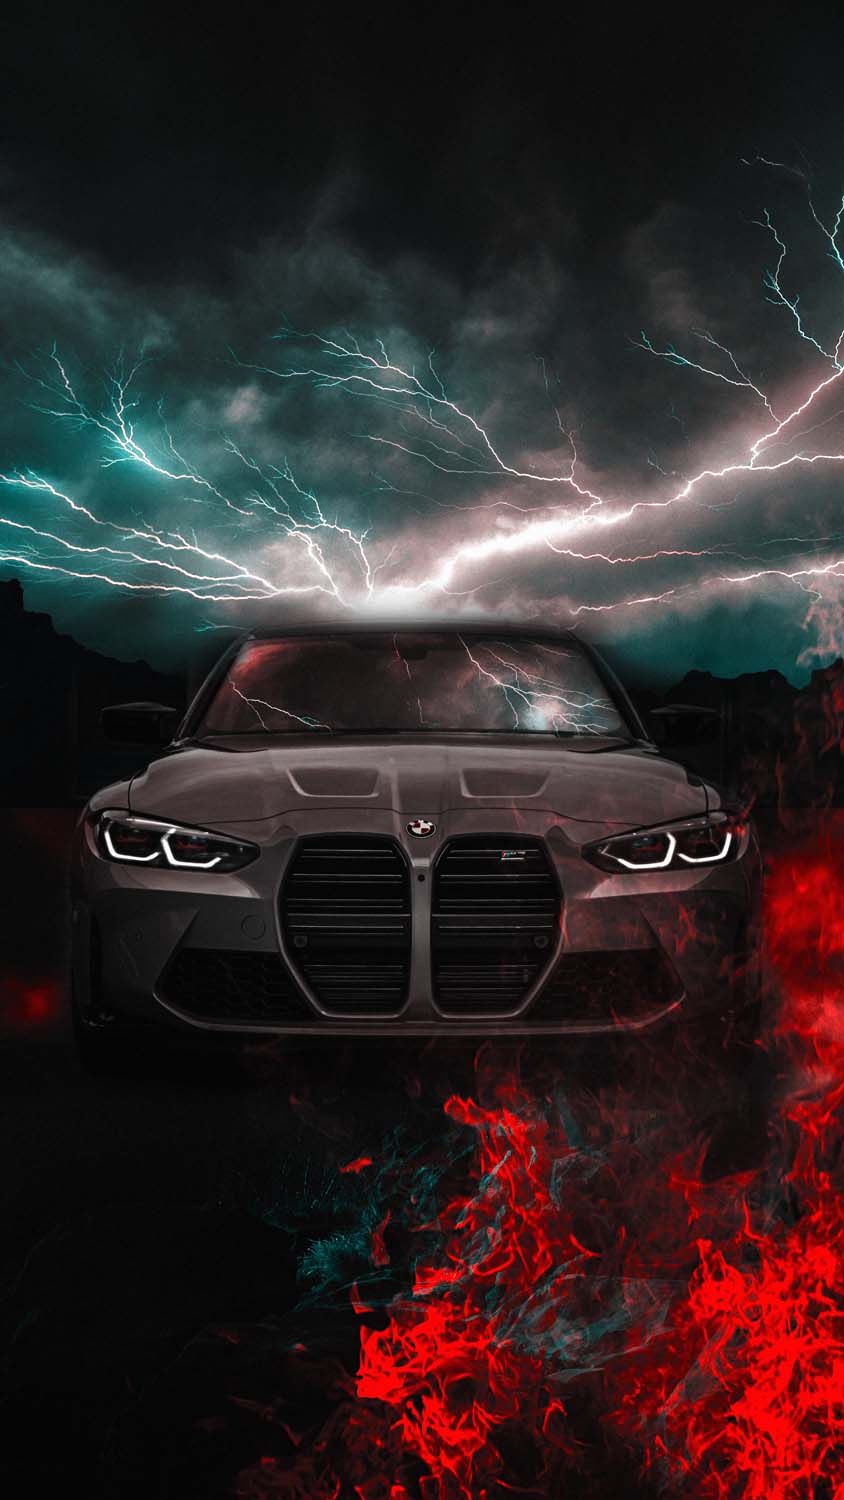 BMW Supreme IPhone Wallpaper HD - IPhone Wallpapers : iPhone Wallpapers